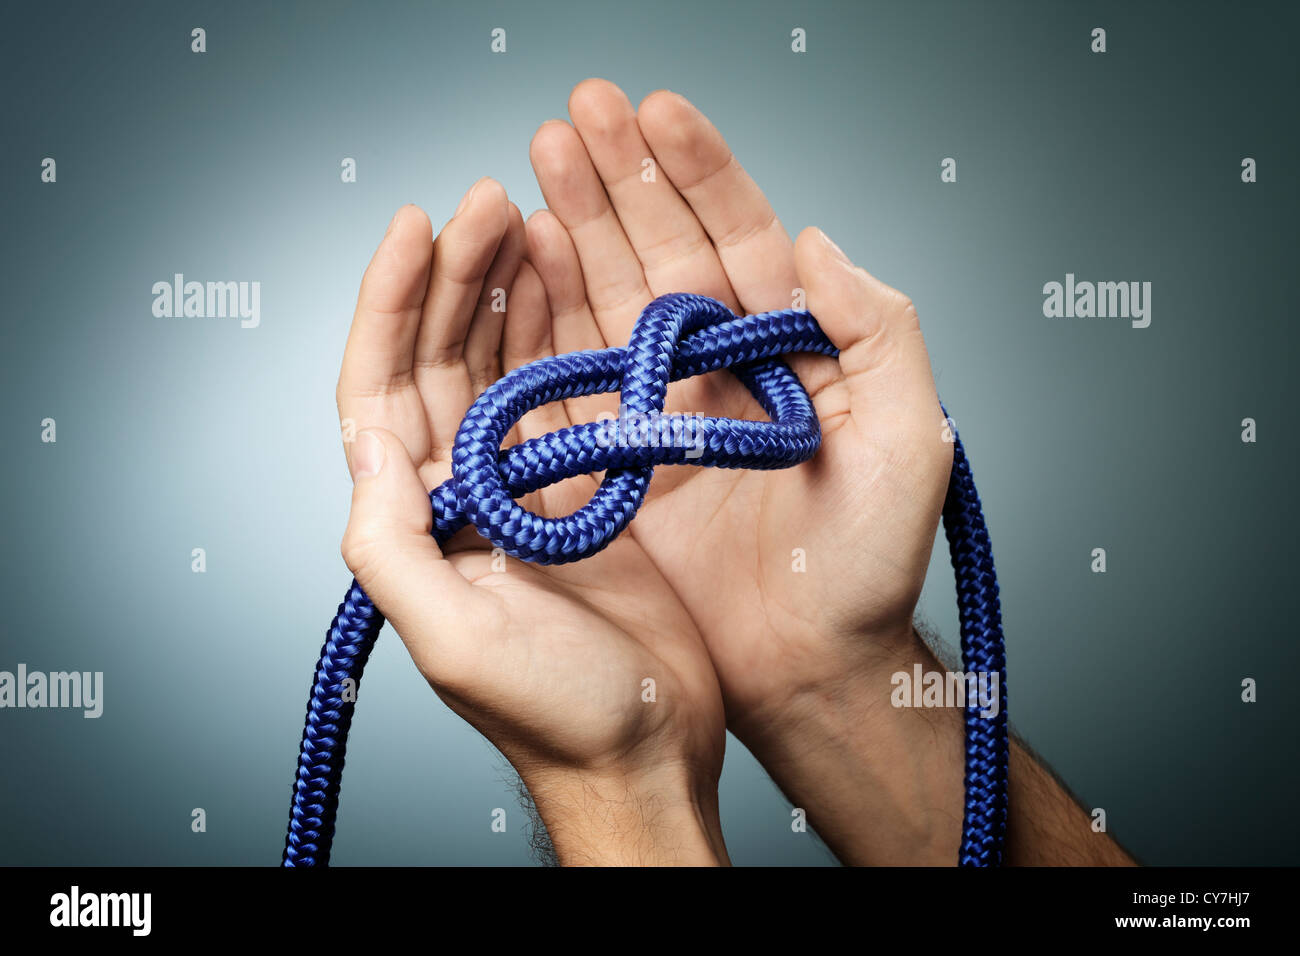 Man holding a blue rope with a figure of eight knot in his hands. Stock Photo